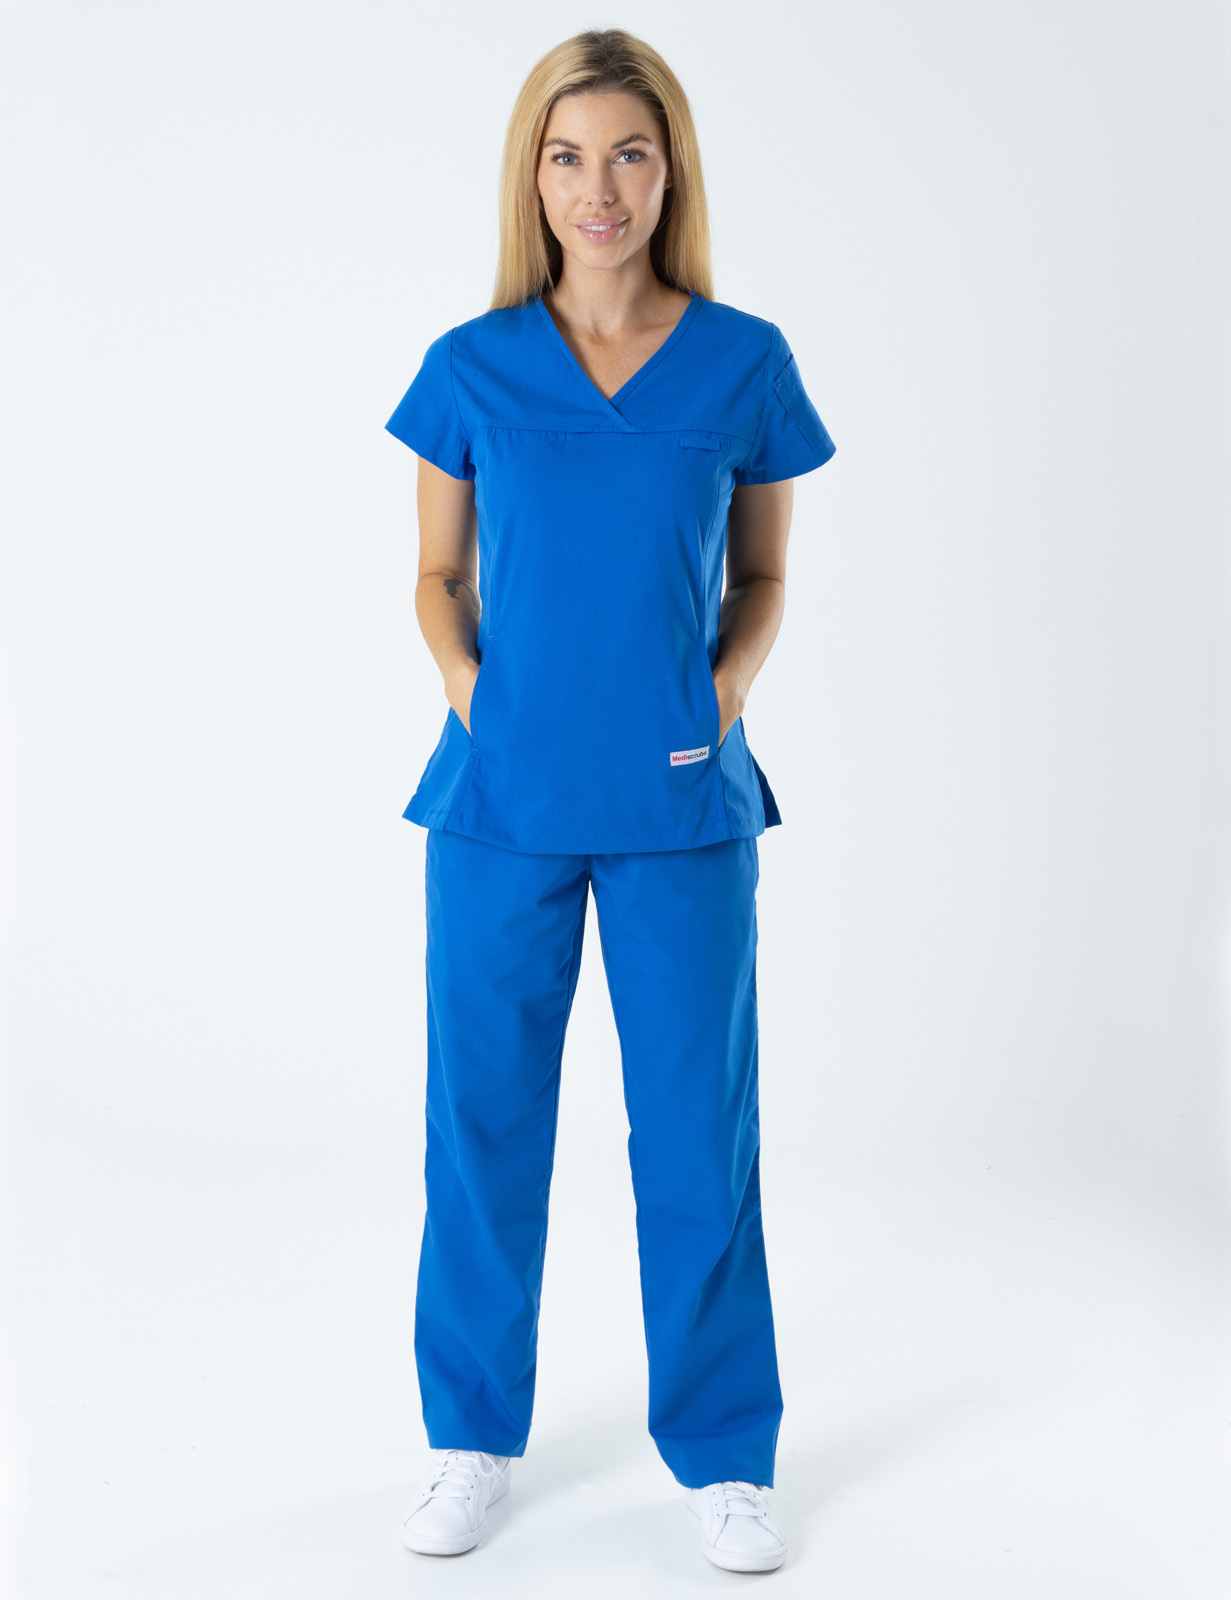 Capricorn Coast Hospital - EN (Women's Fit Solid Scrub Top and Cargo Pants in Royal incl Logos)